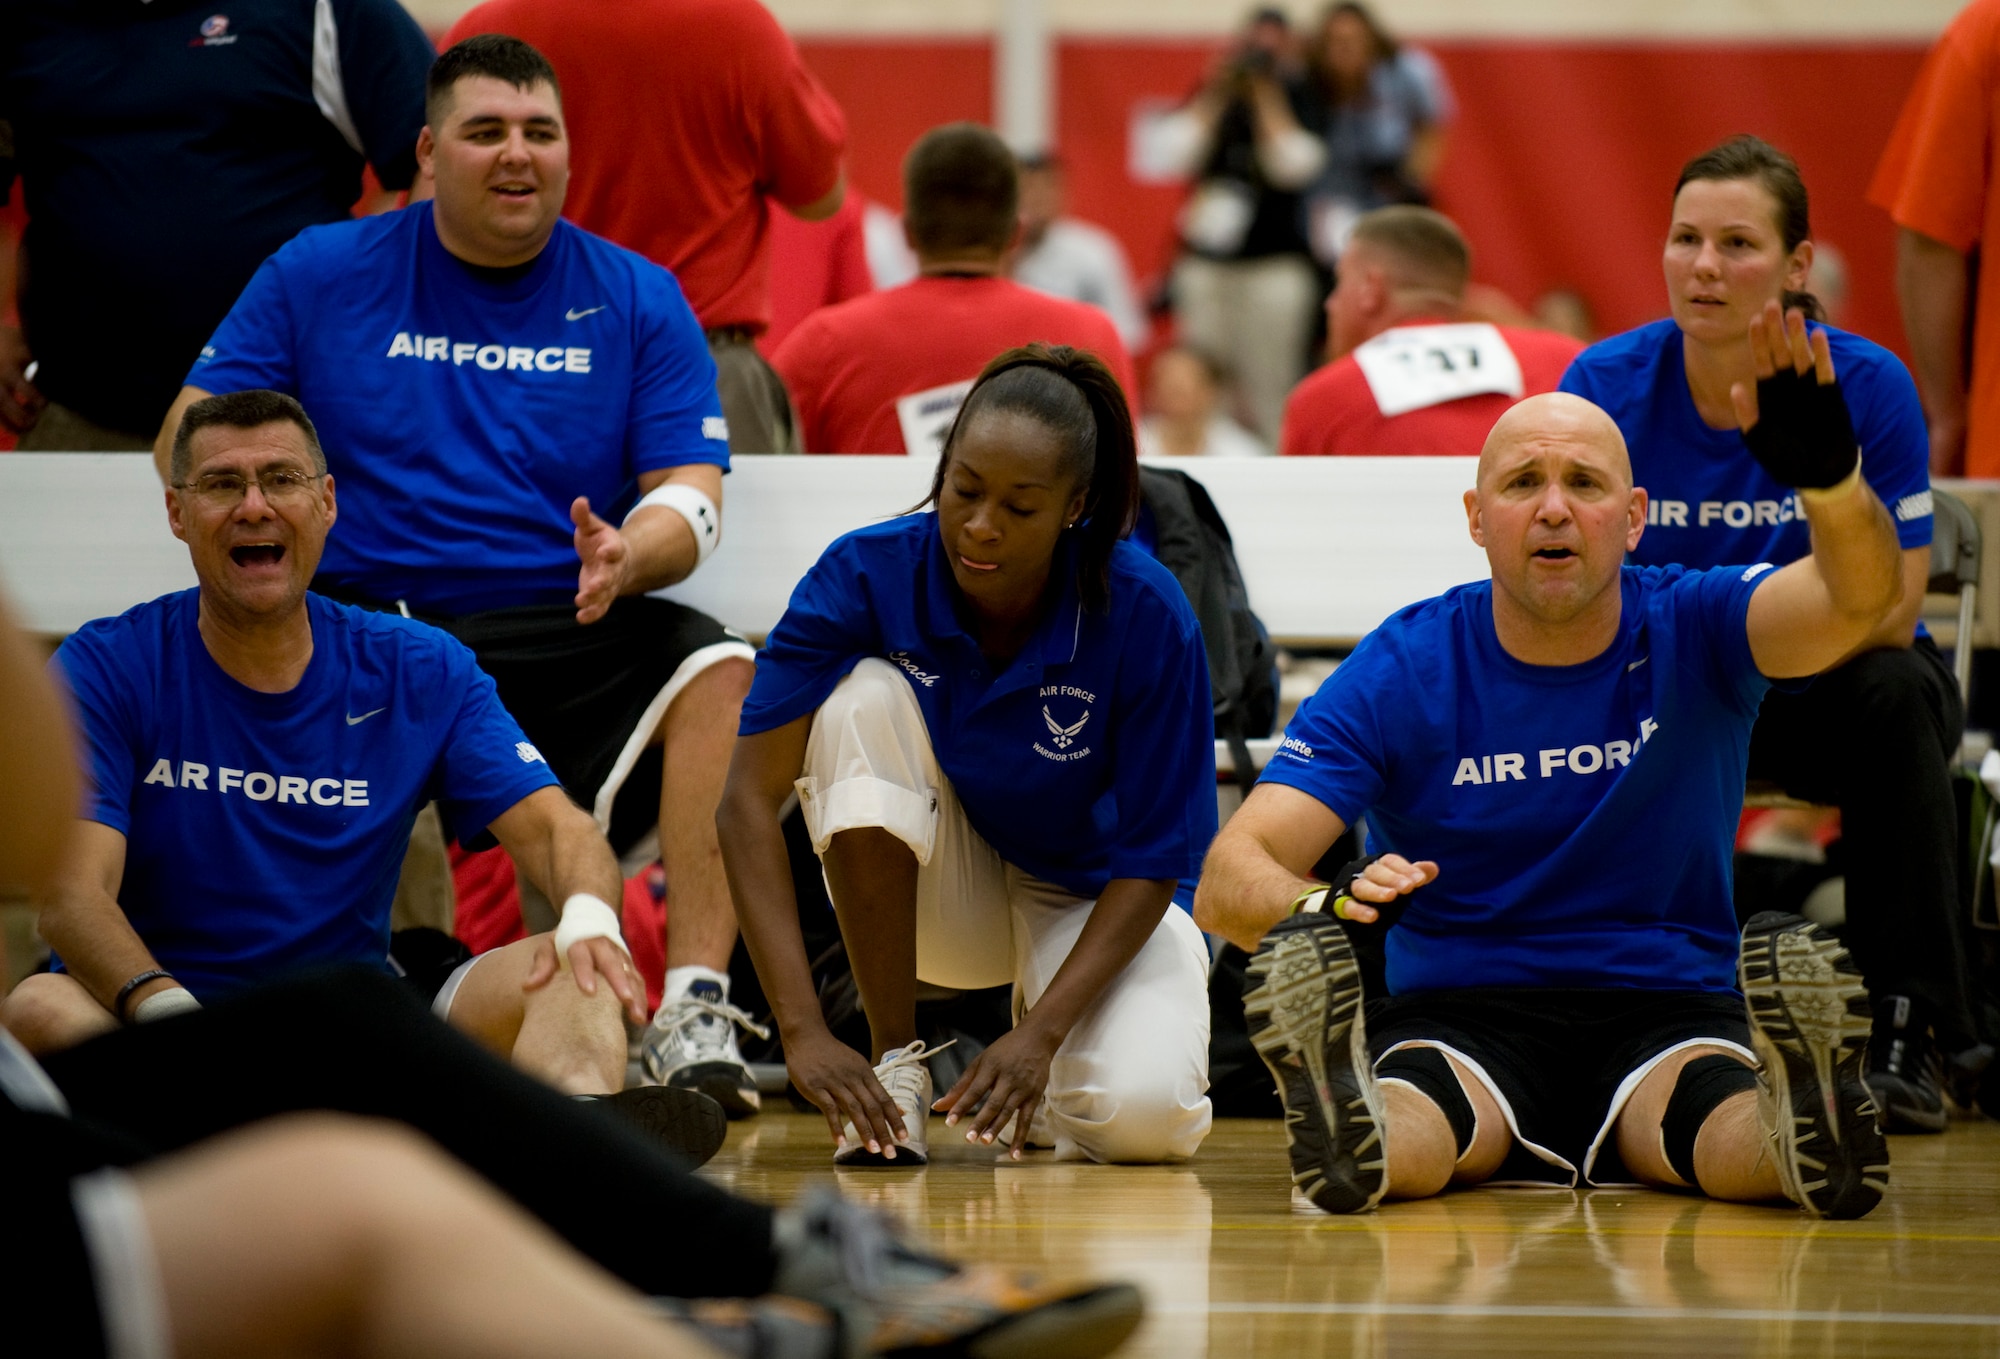 The Air Force sideline cheers on their team during sitting volleyball at the 2011 Warrior Games in Colorado Springs, Colo., May 17. The Air Force played the U.S. Special Operations Command team, losing the series 2 games to 1. (U.S. Air Force photo/Staff Sgt. Christopher Griffin)